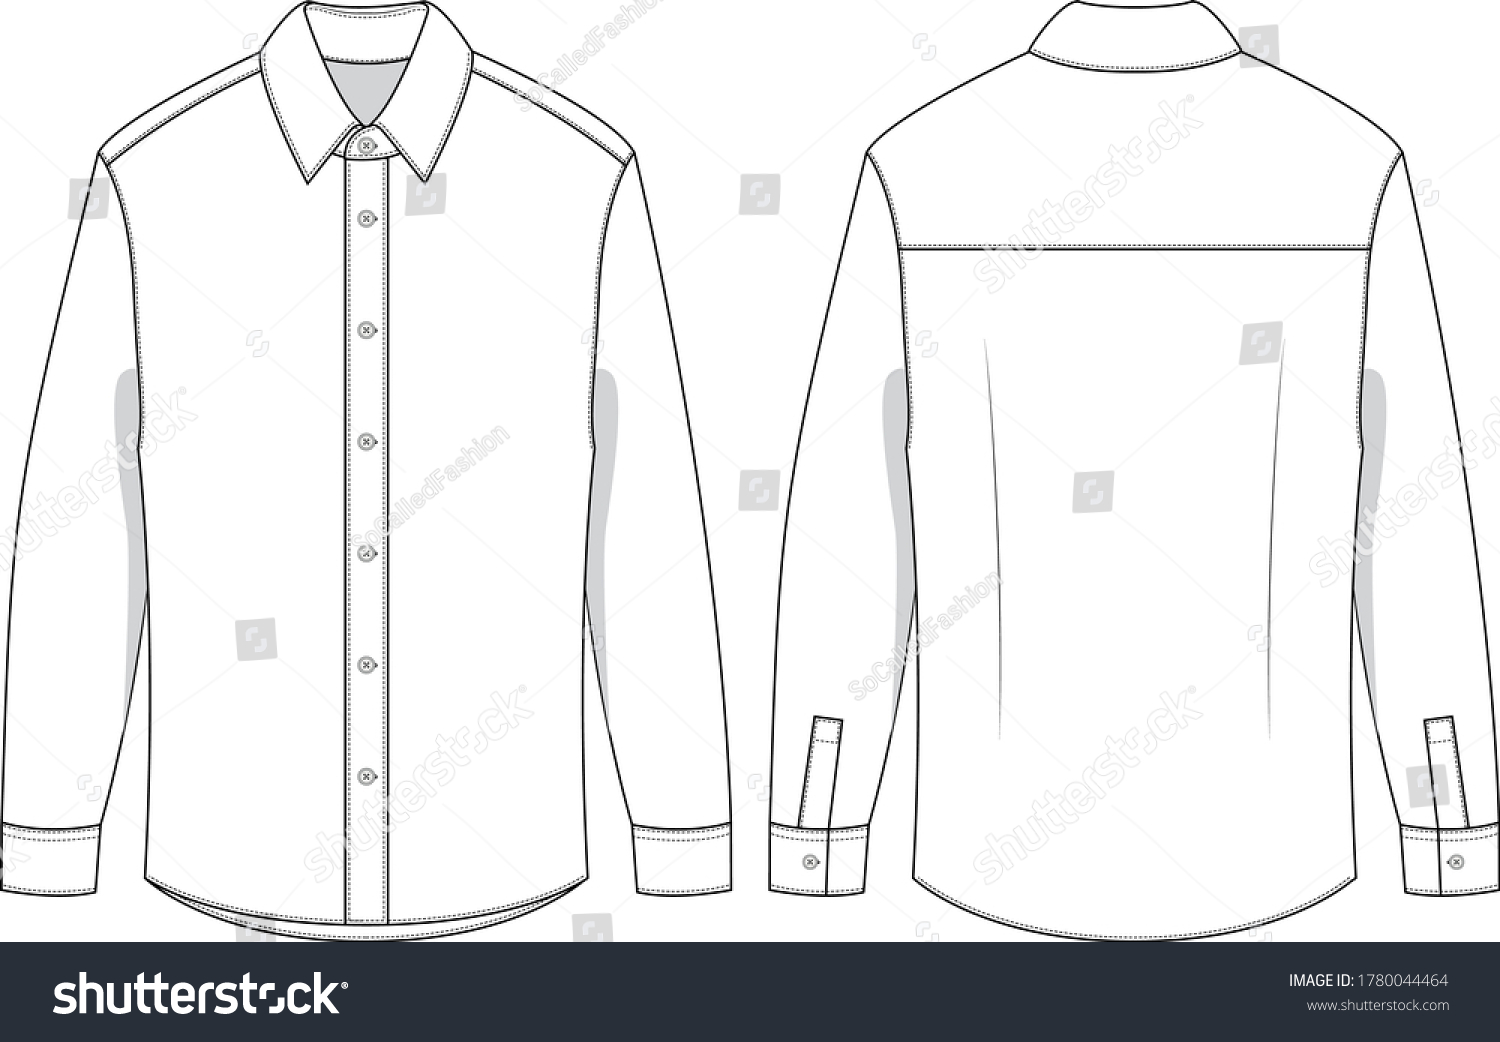 Formal Fitted Shirt Svg Vector Cad Stock Vector (Royalty Free ...